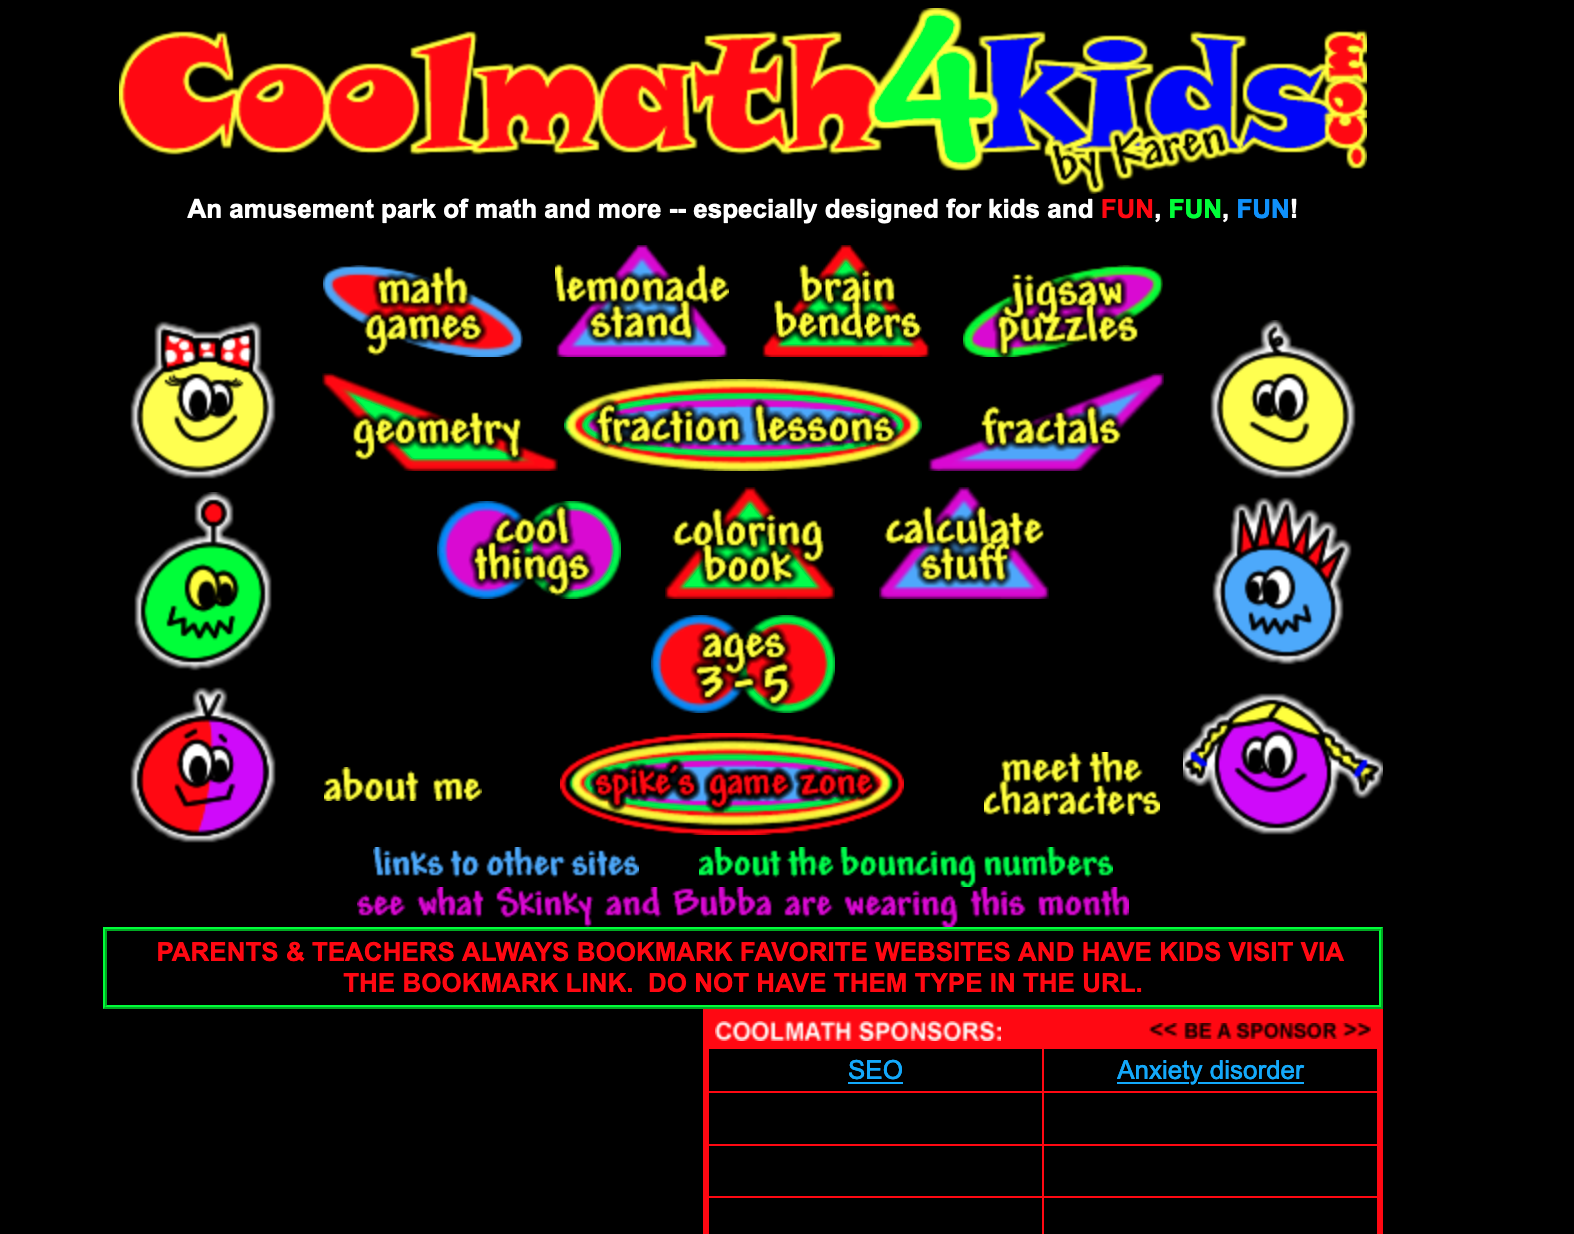 click this link to visit the archived 2004 Cool Math gamed page